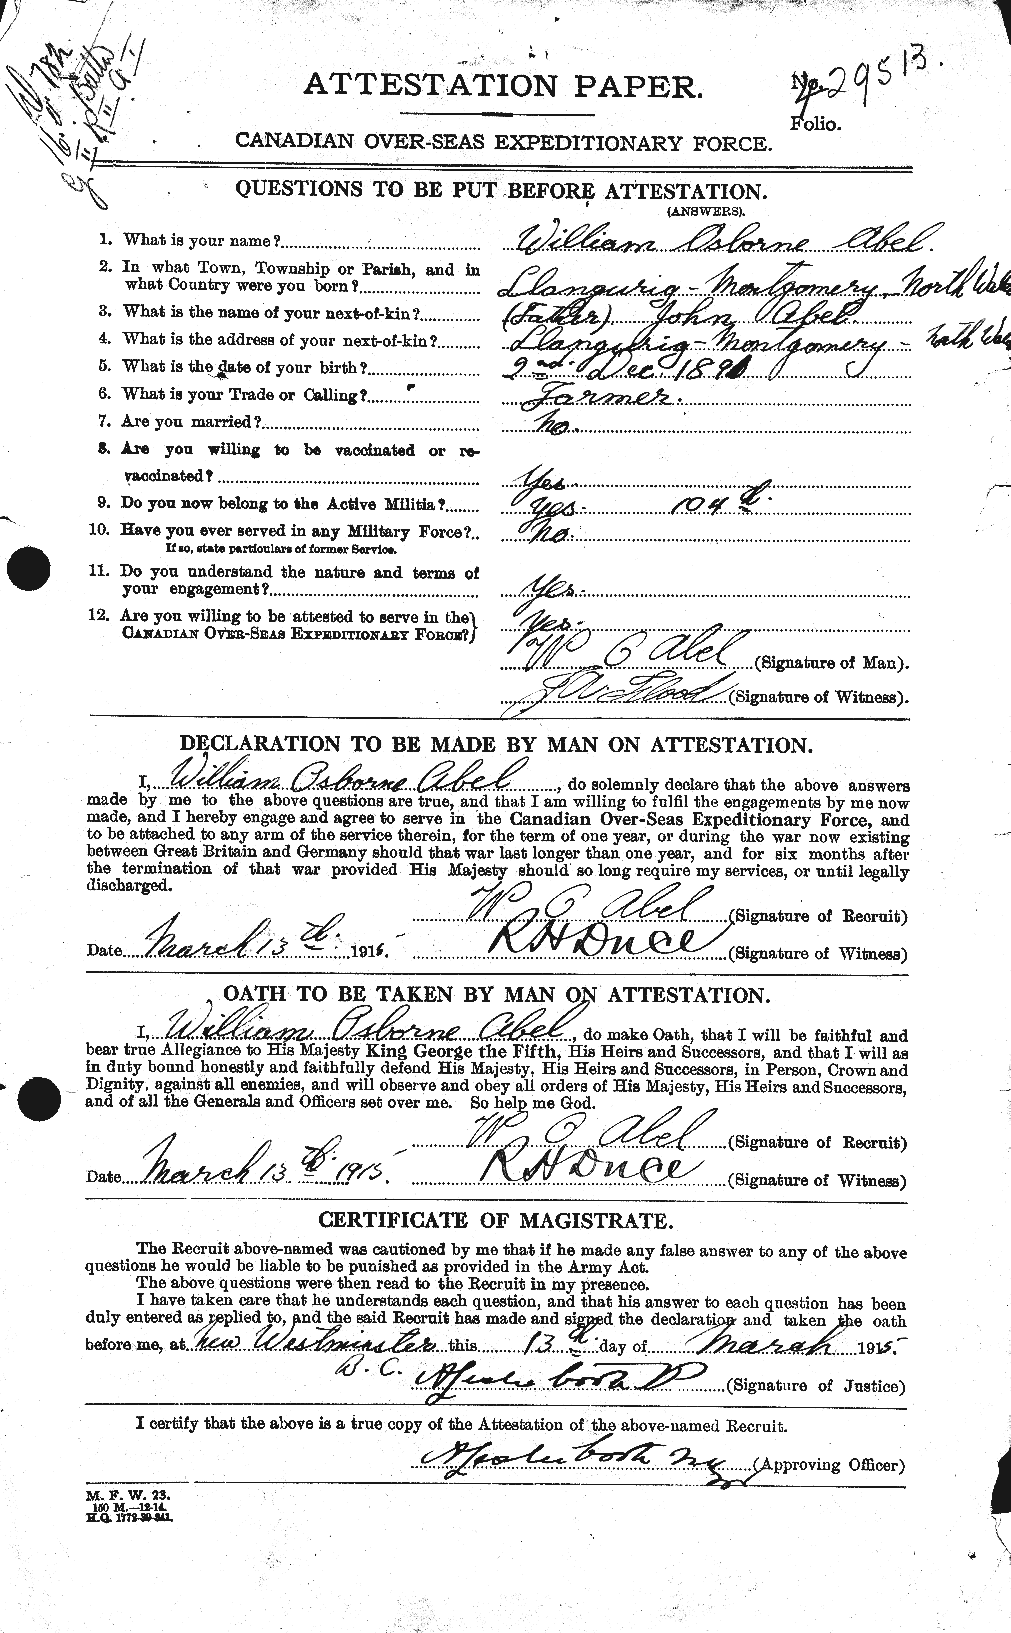 Personnel Records of the First World War - CEF 201459a